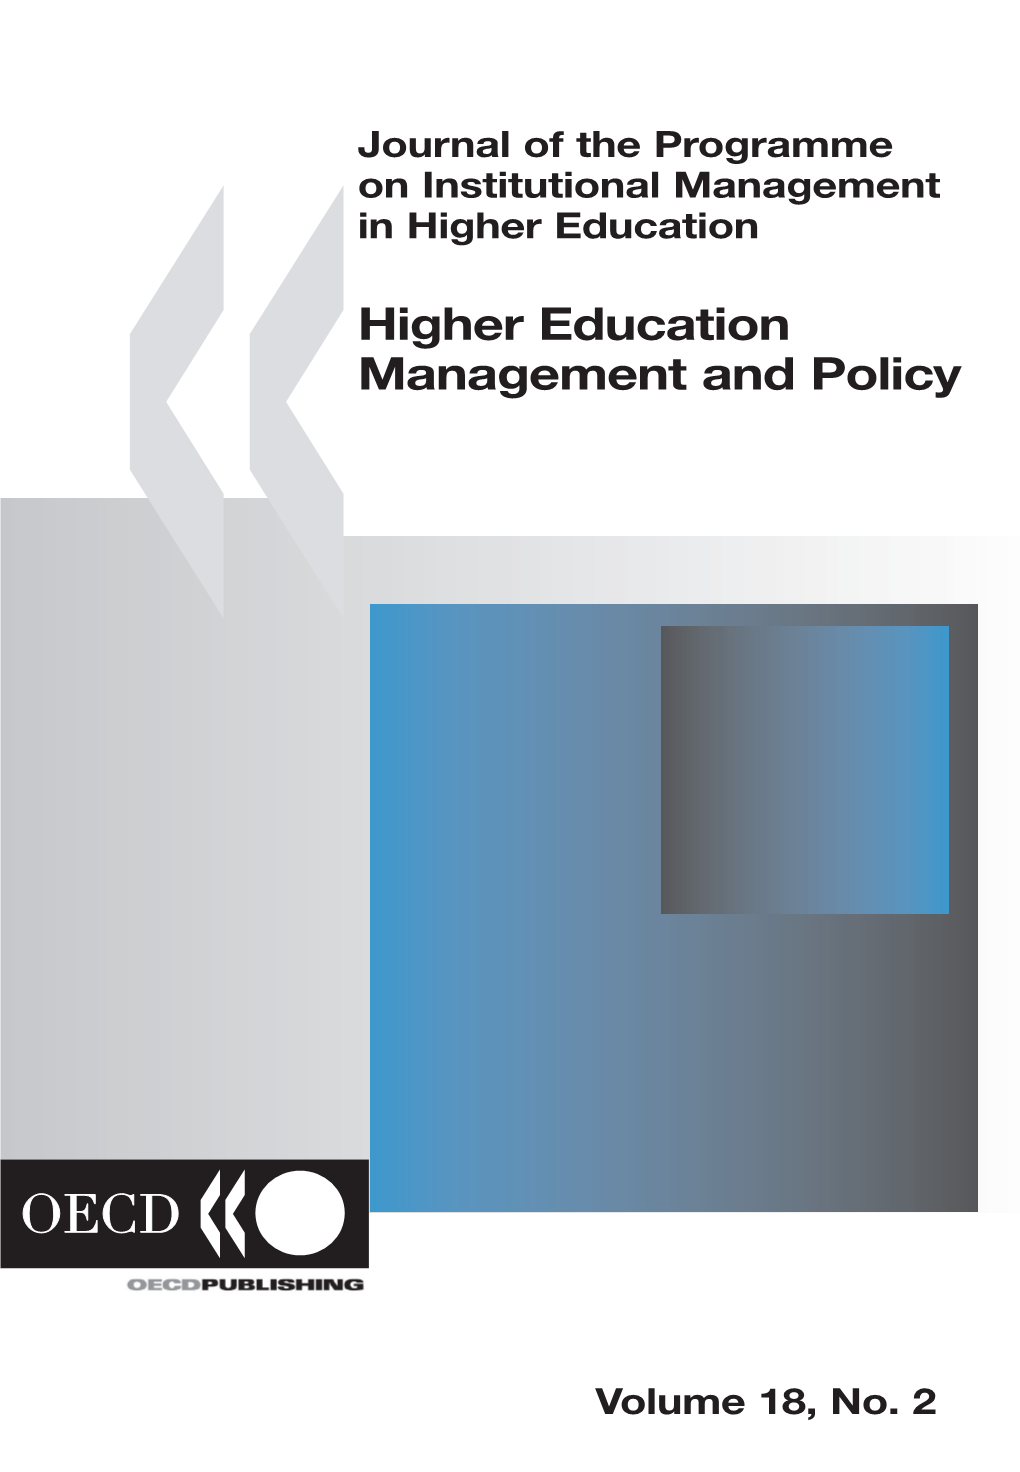 Higher Education Management and Policy – Volume 18, No. 2